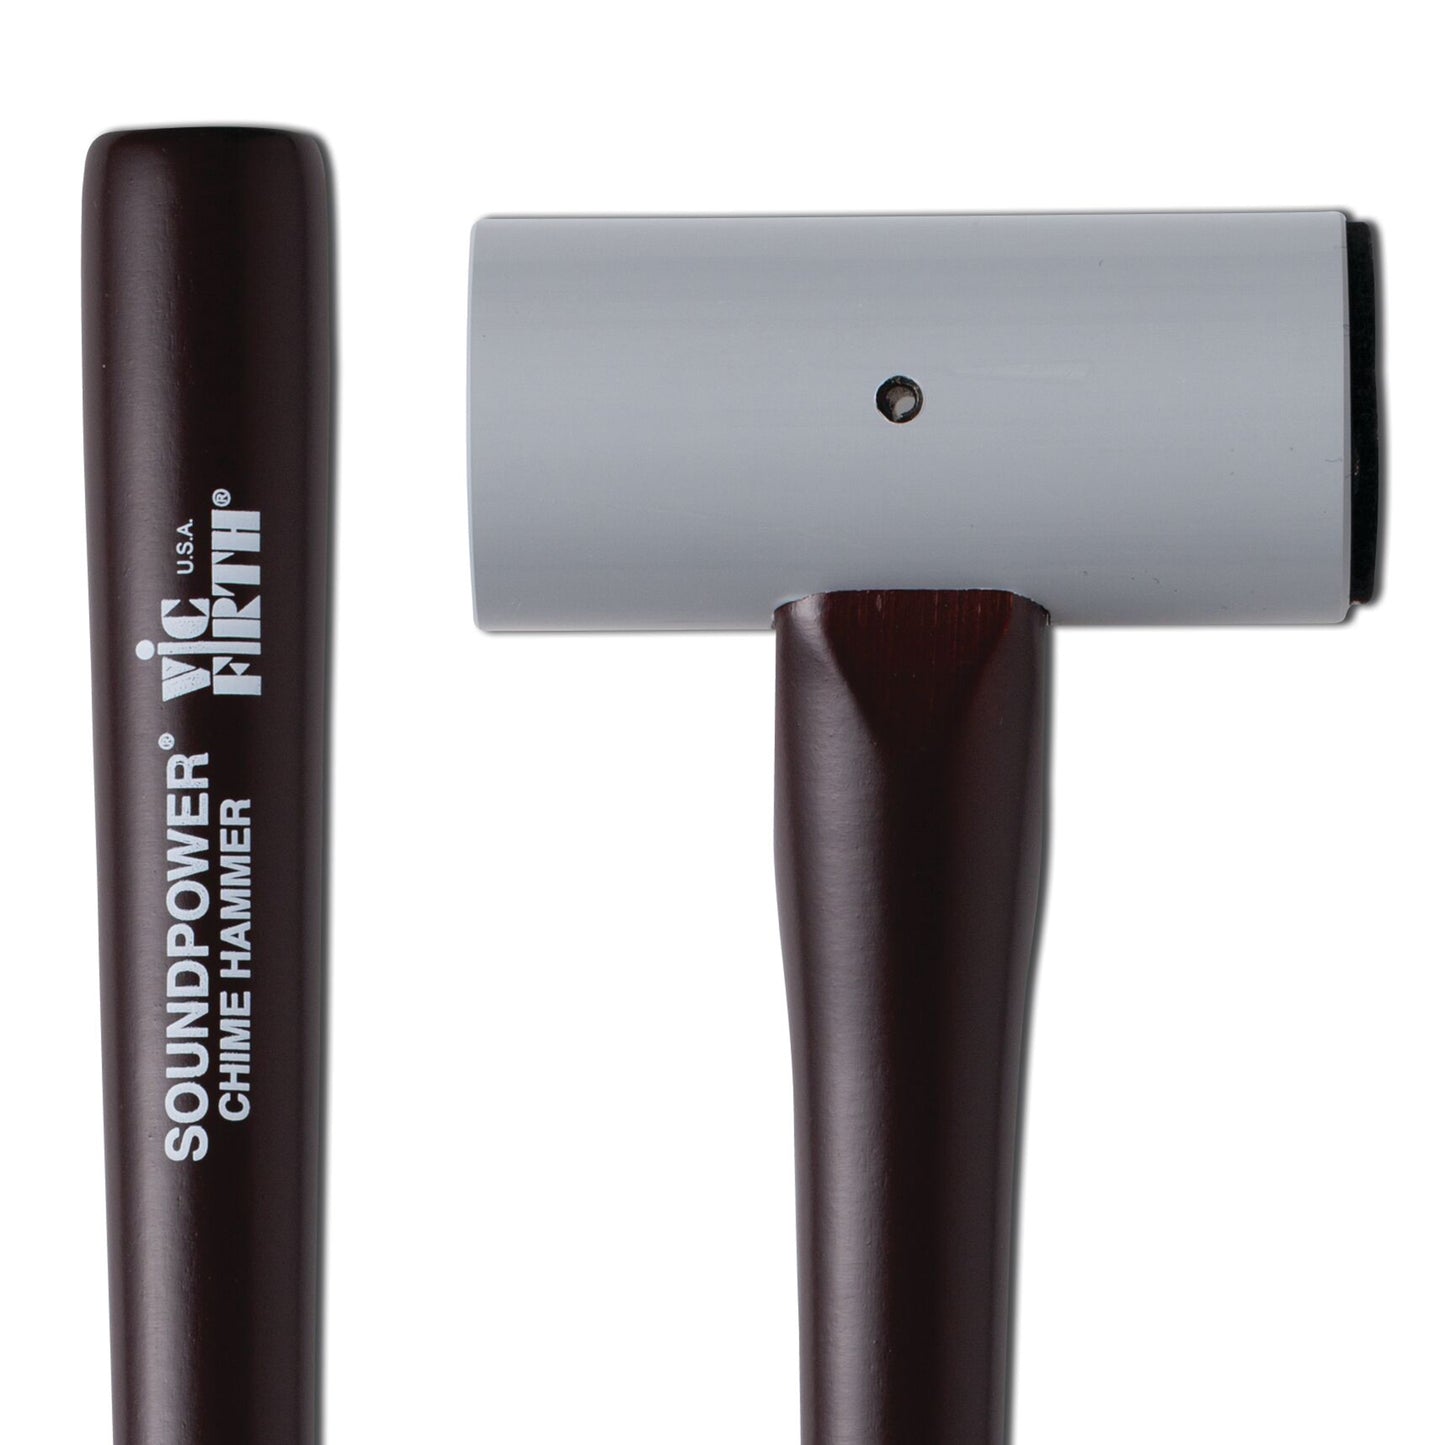 CH - Soundpower Chime Hammer Mallets